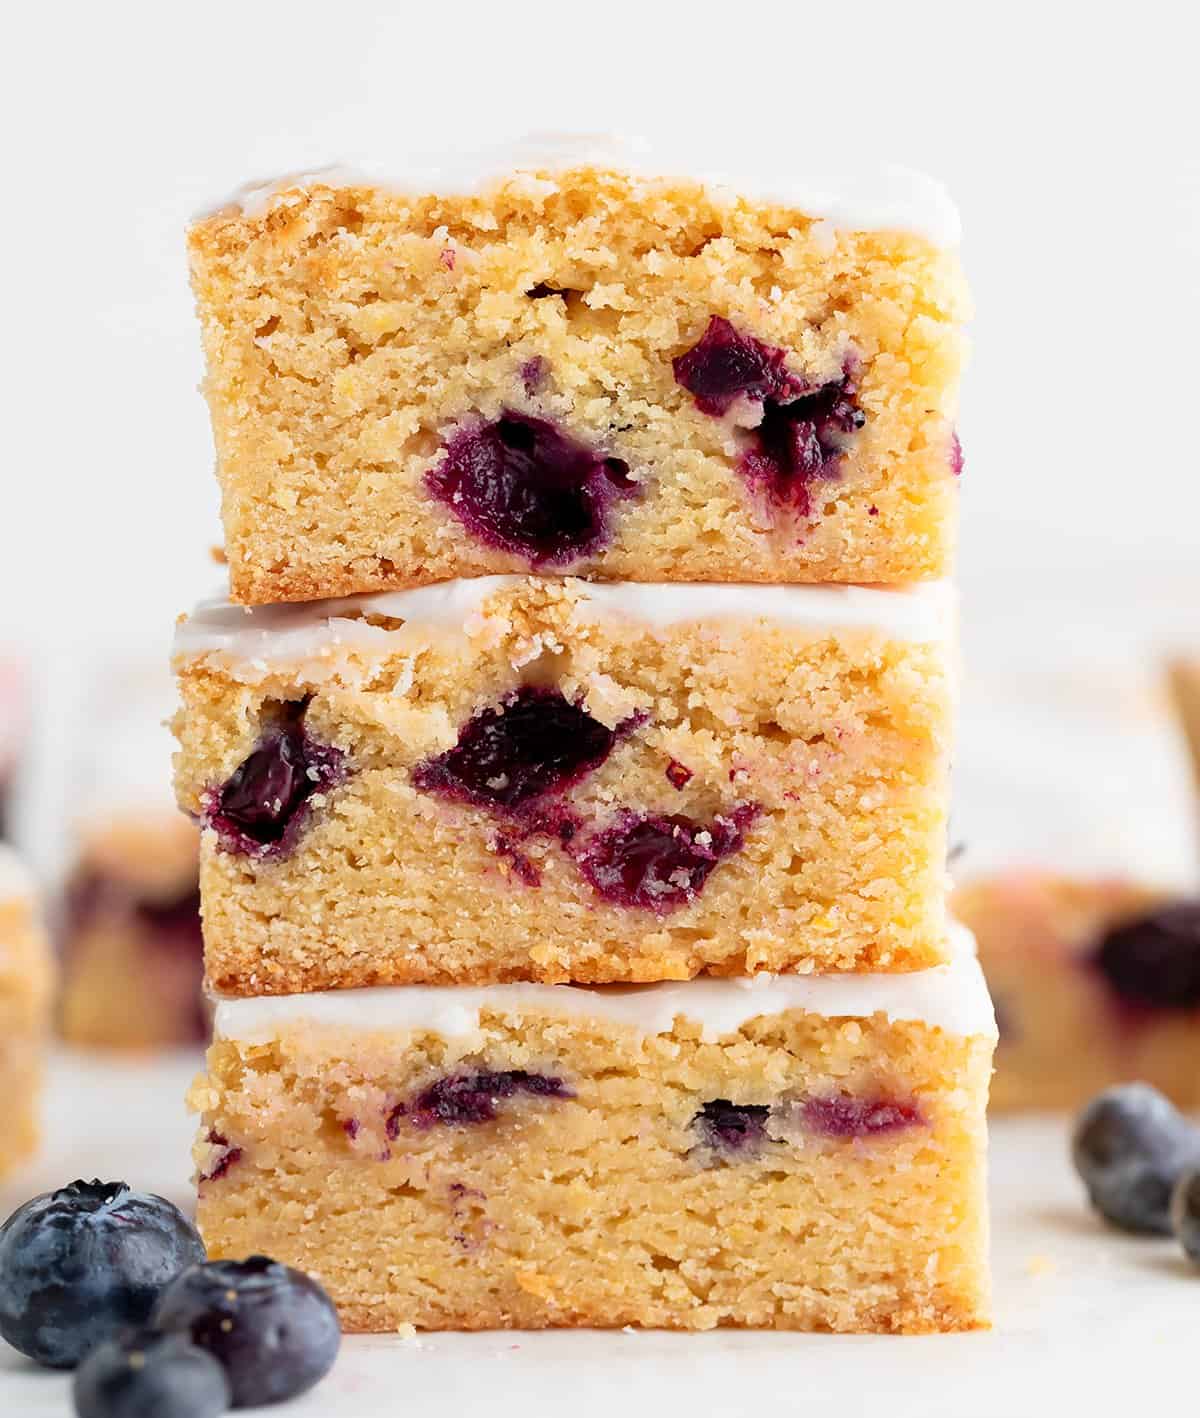 Stack of Lemon Blueberry Blondies on a white surface.